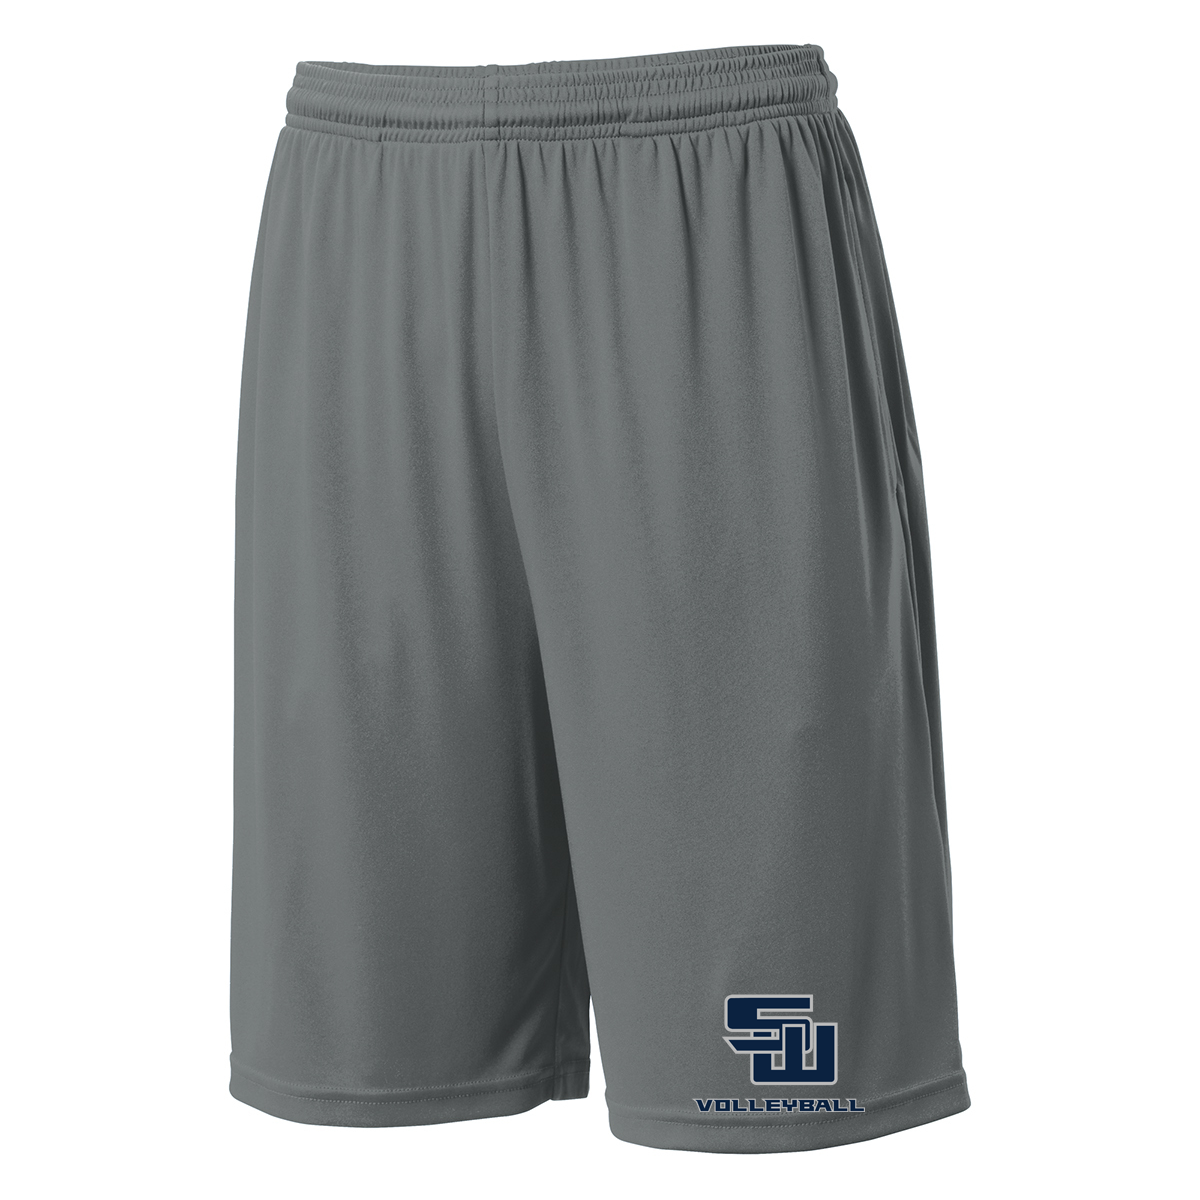 Smithtown West Volleyball  Shorts